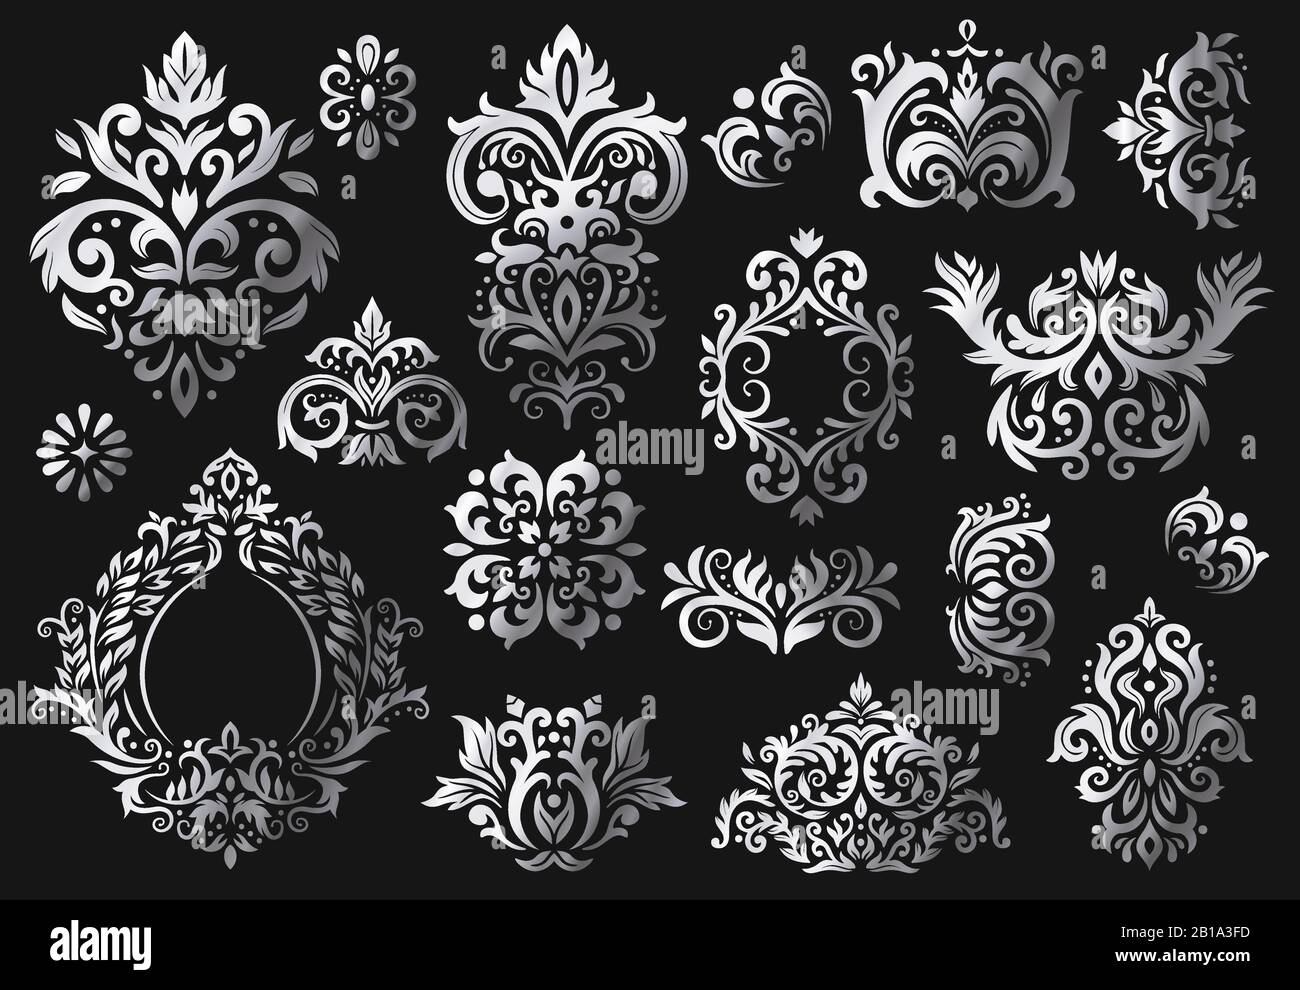 Vintage baroque ornament. Ornate floral sprigs pattern, luxury damask ornaments and victorian twill damasks patterns vector set Stock Vector